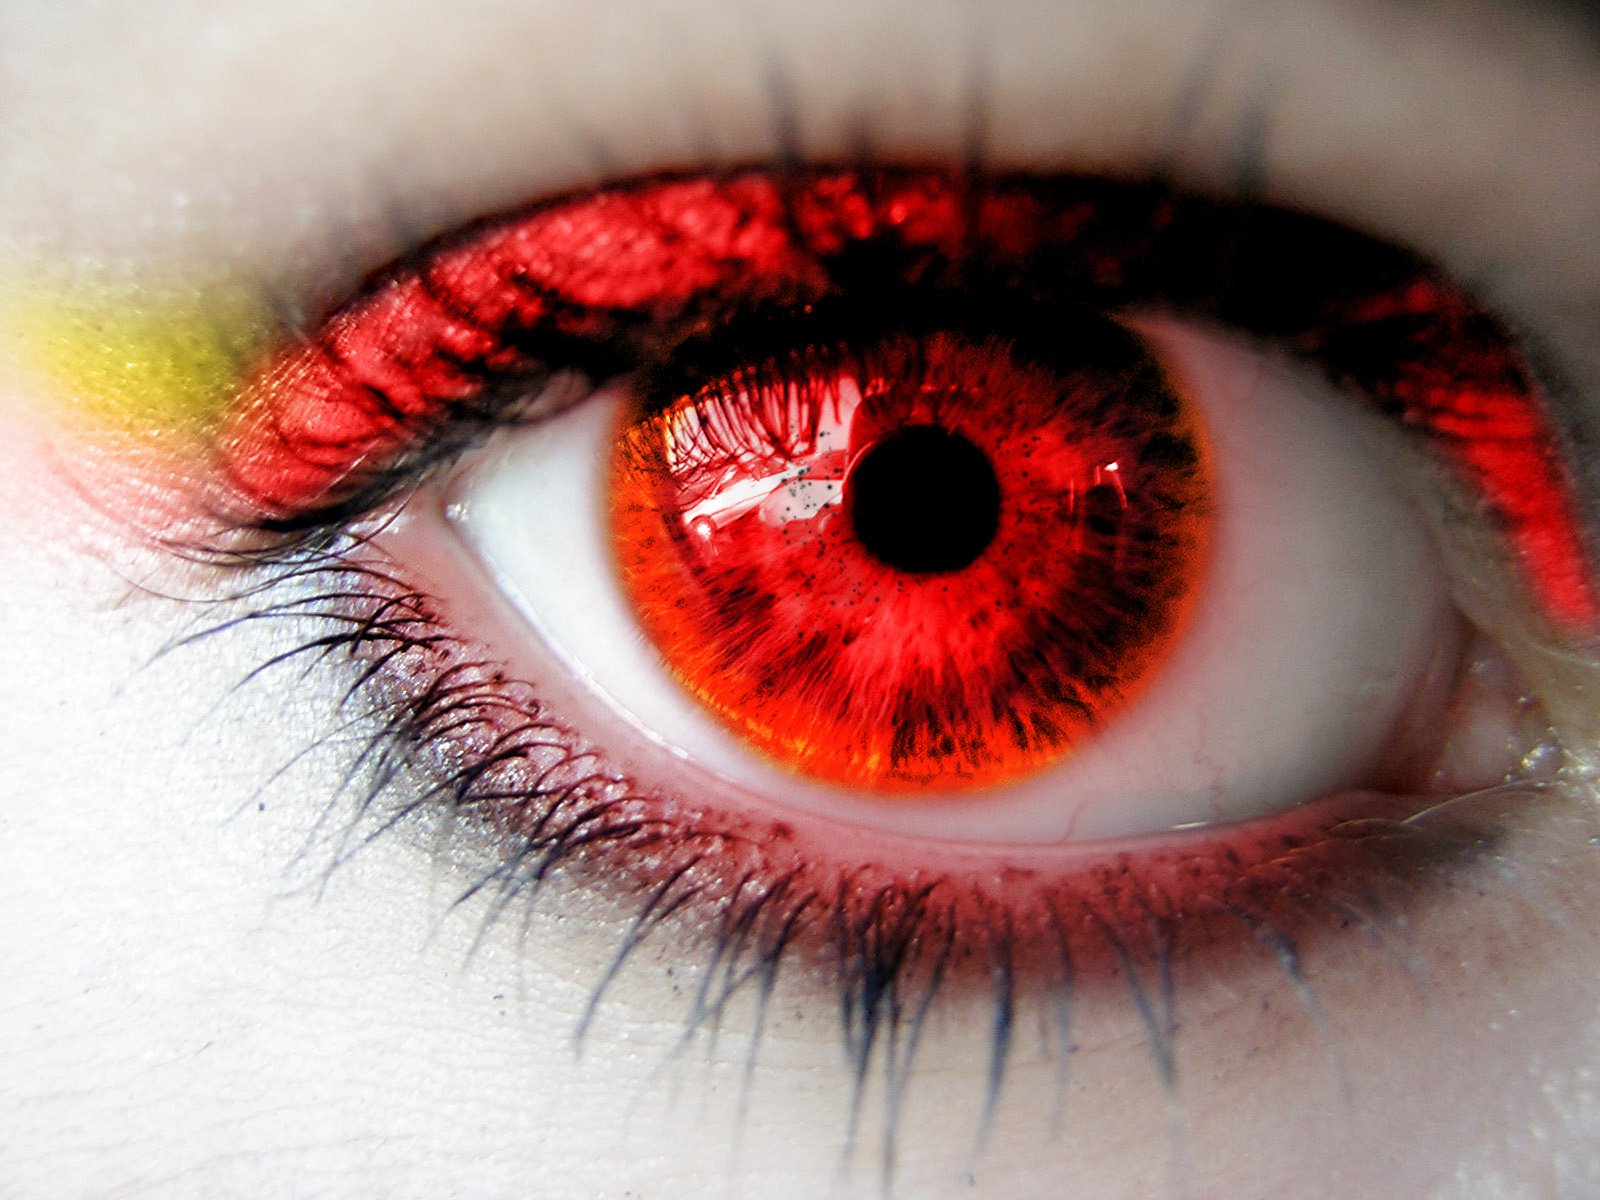 HD Eyes Wallpaper latest wallpapers free download